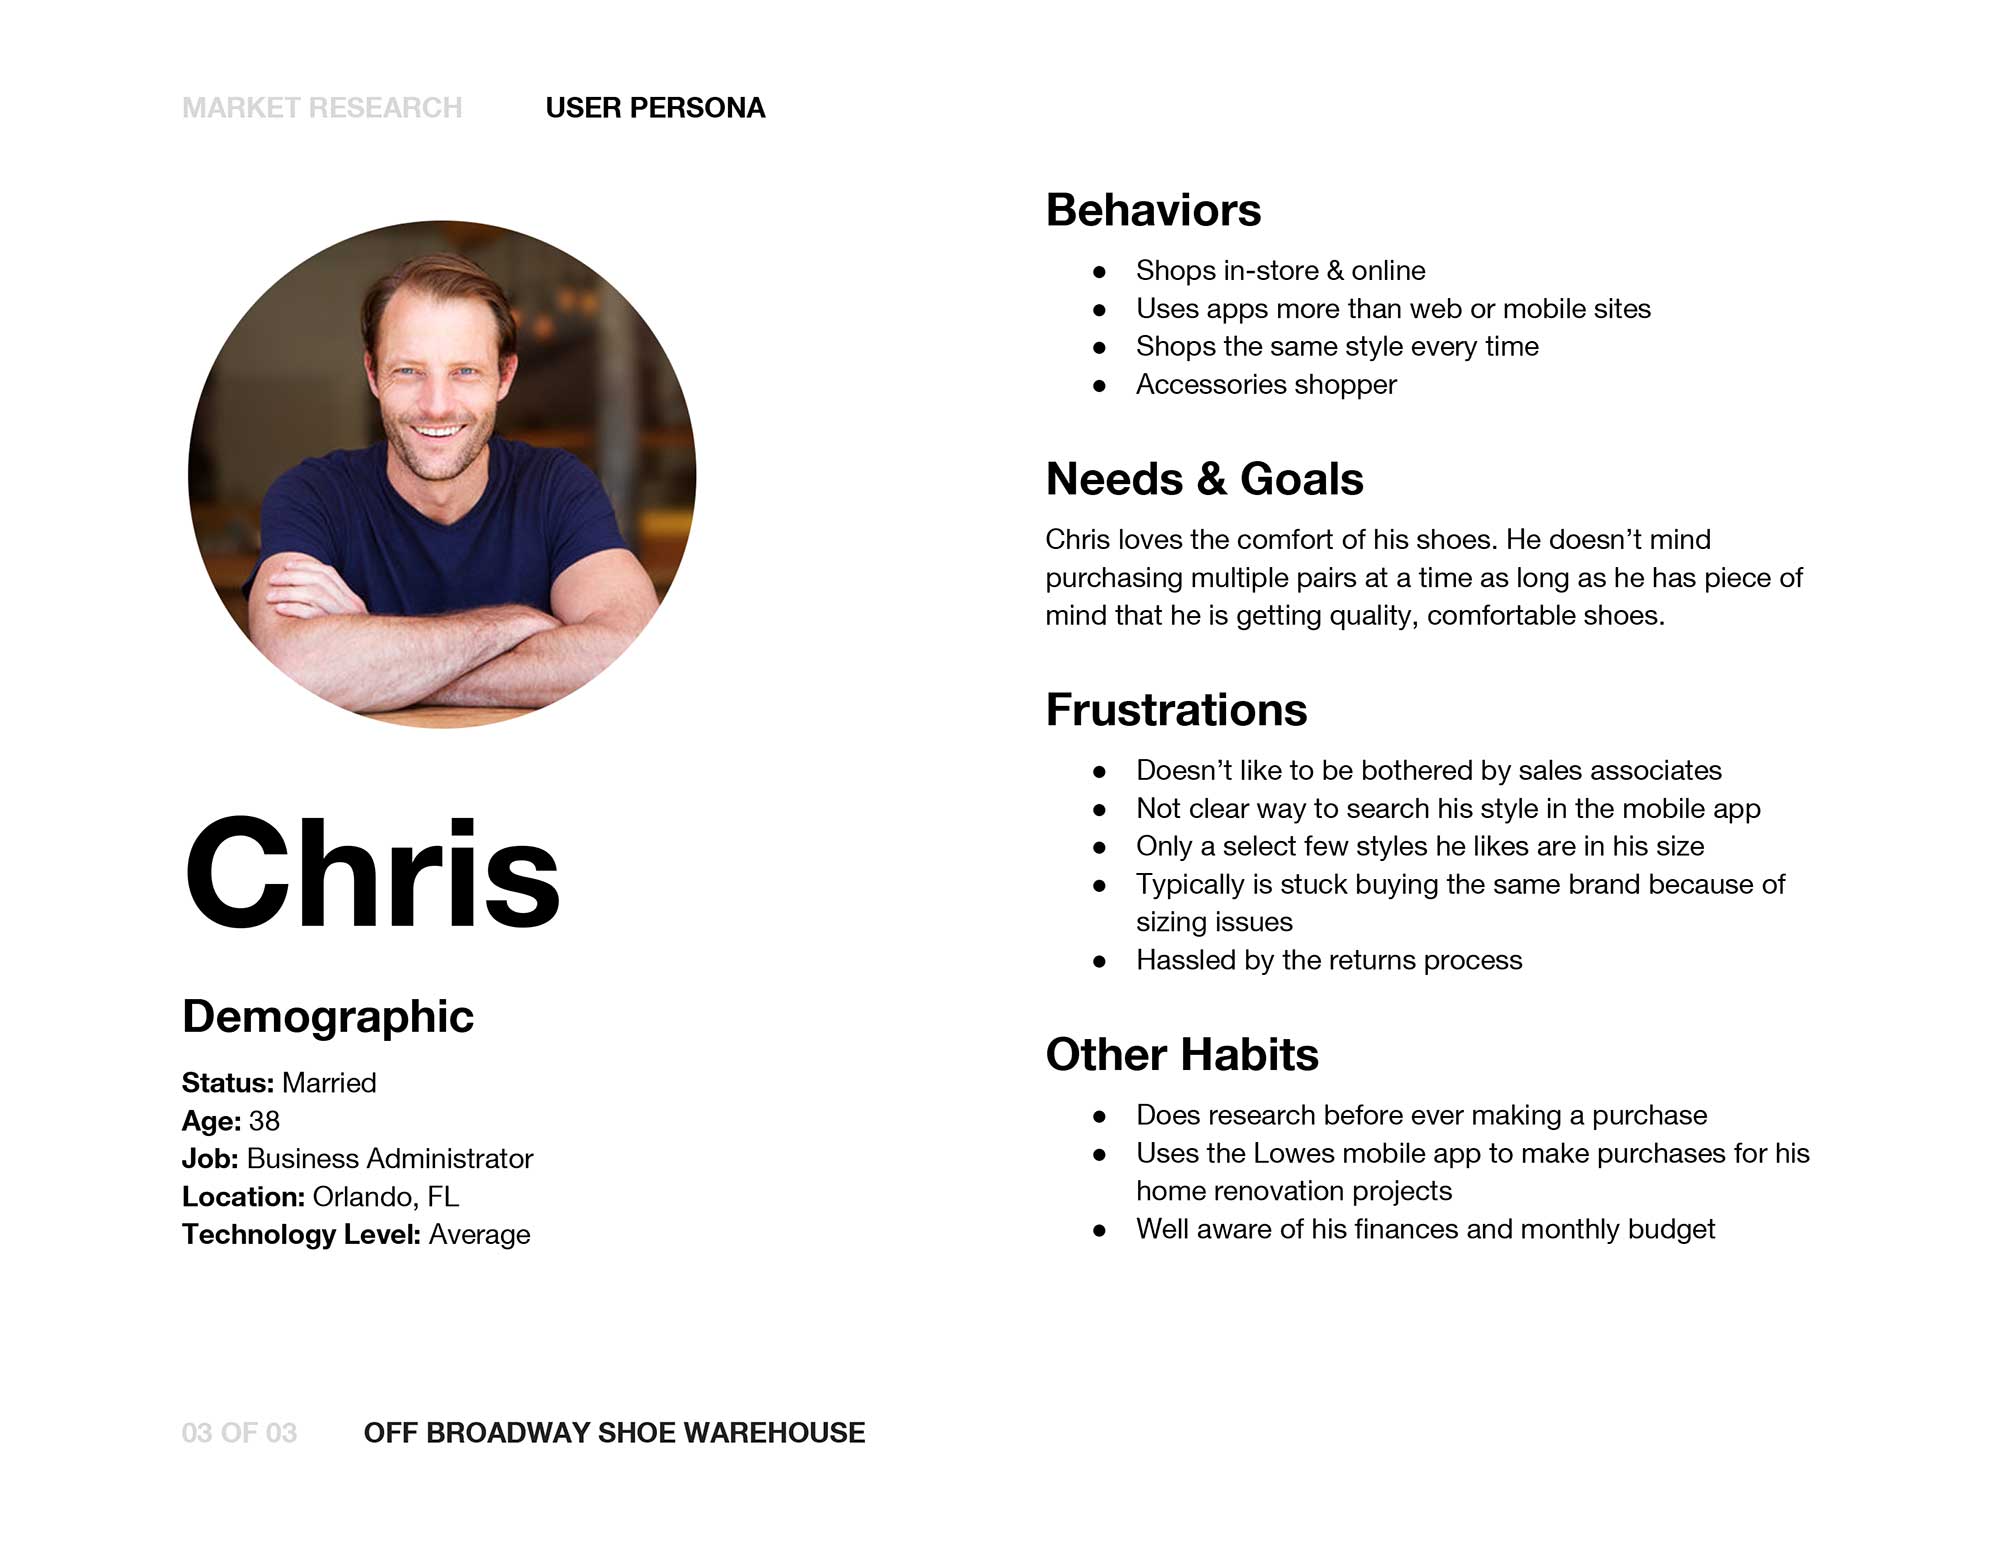 a user persona of a man named chris